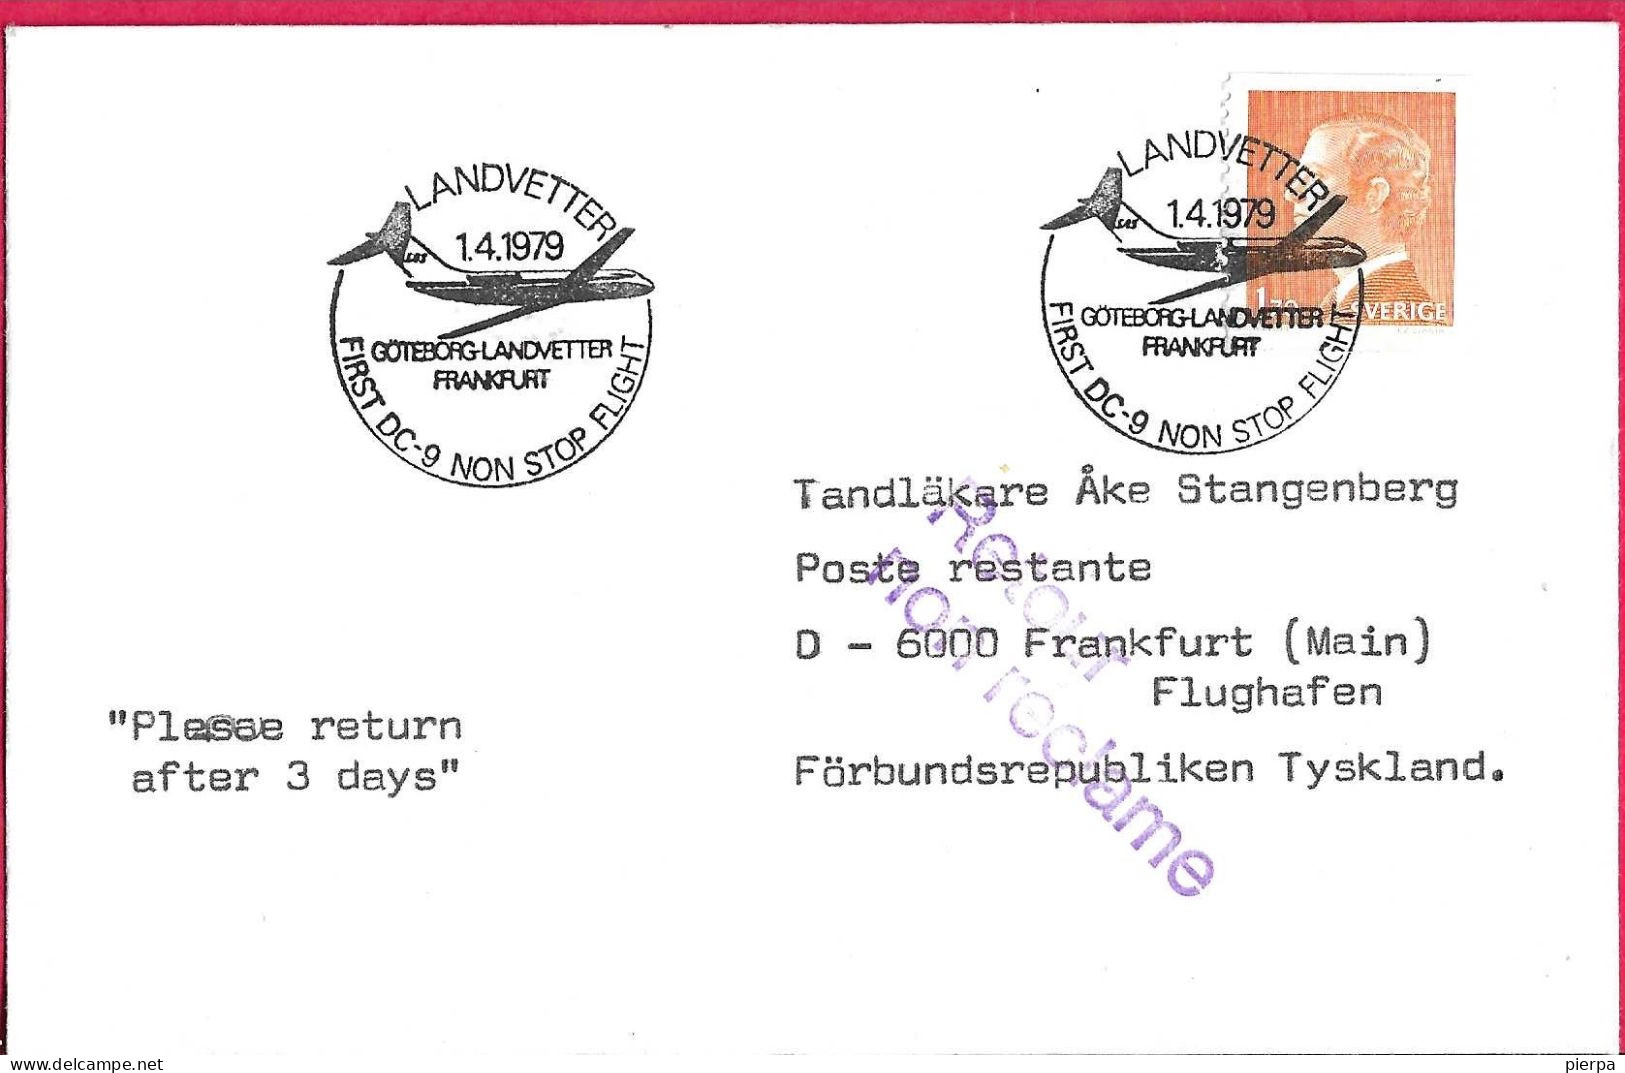 SVERIGE - FIRST DC-9 NON STOP FLIGHT FROM GOTEBORG TO FRANKFURT * 1.4.1979* ON OFFICIAL ENVELOPE - Covers & Documents